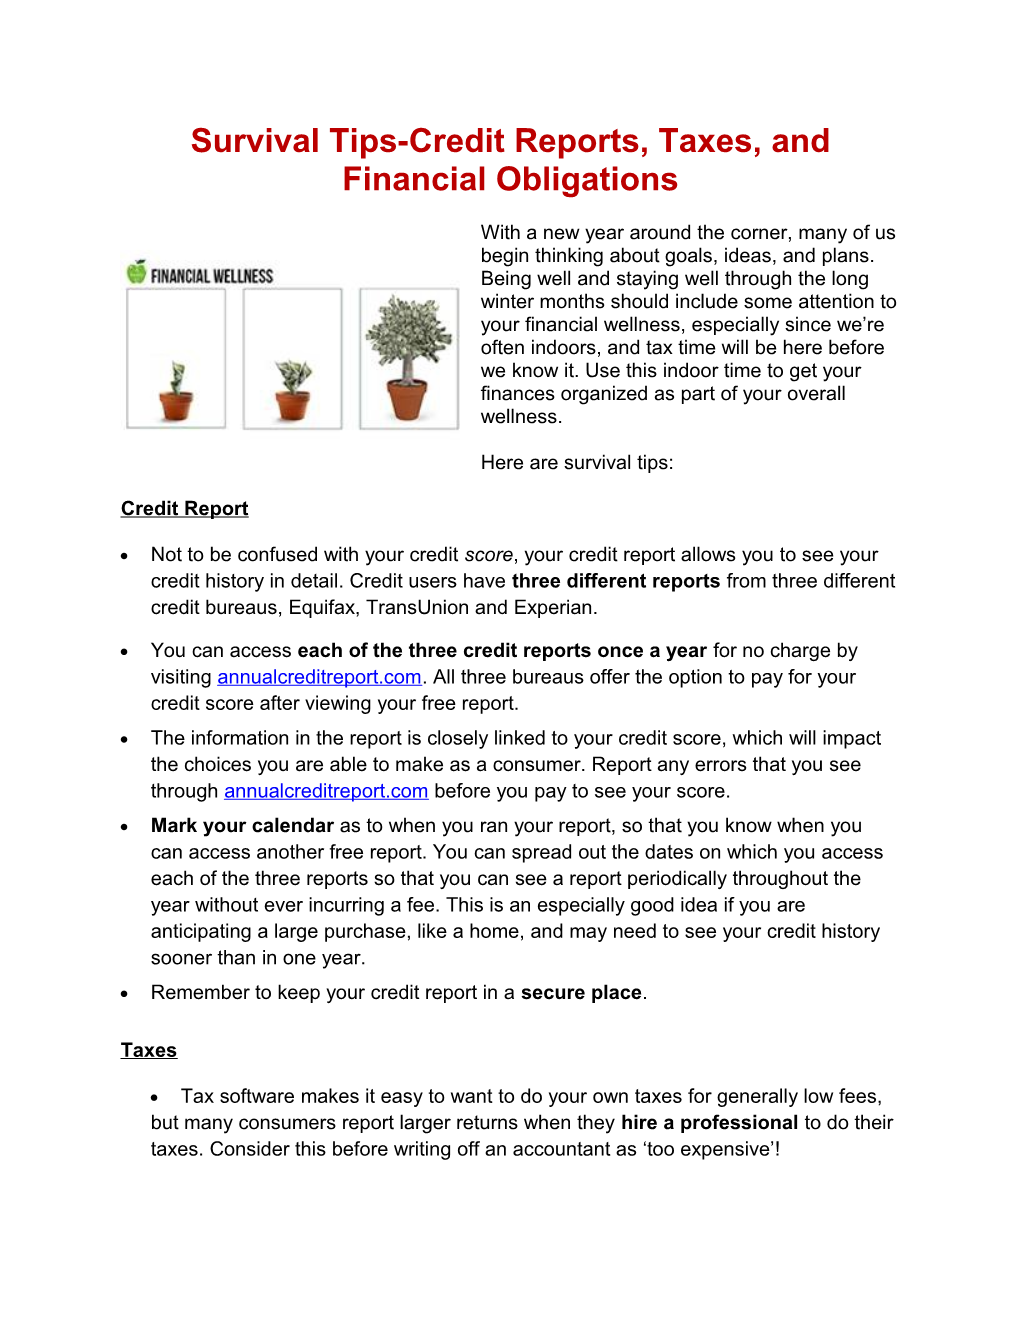 Survival Tips-Credit Reports, Taxes, and Financial Obligations